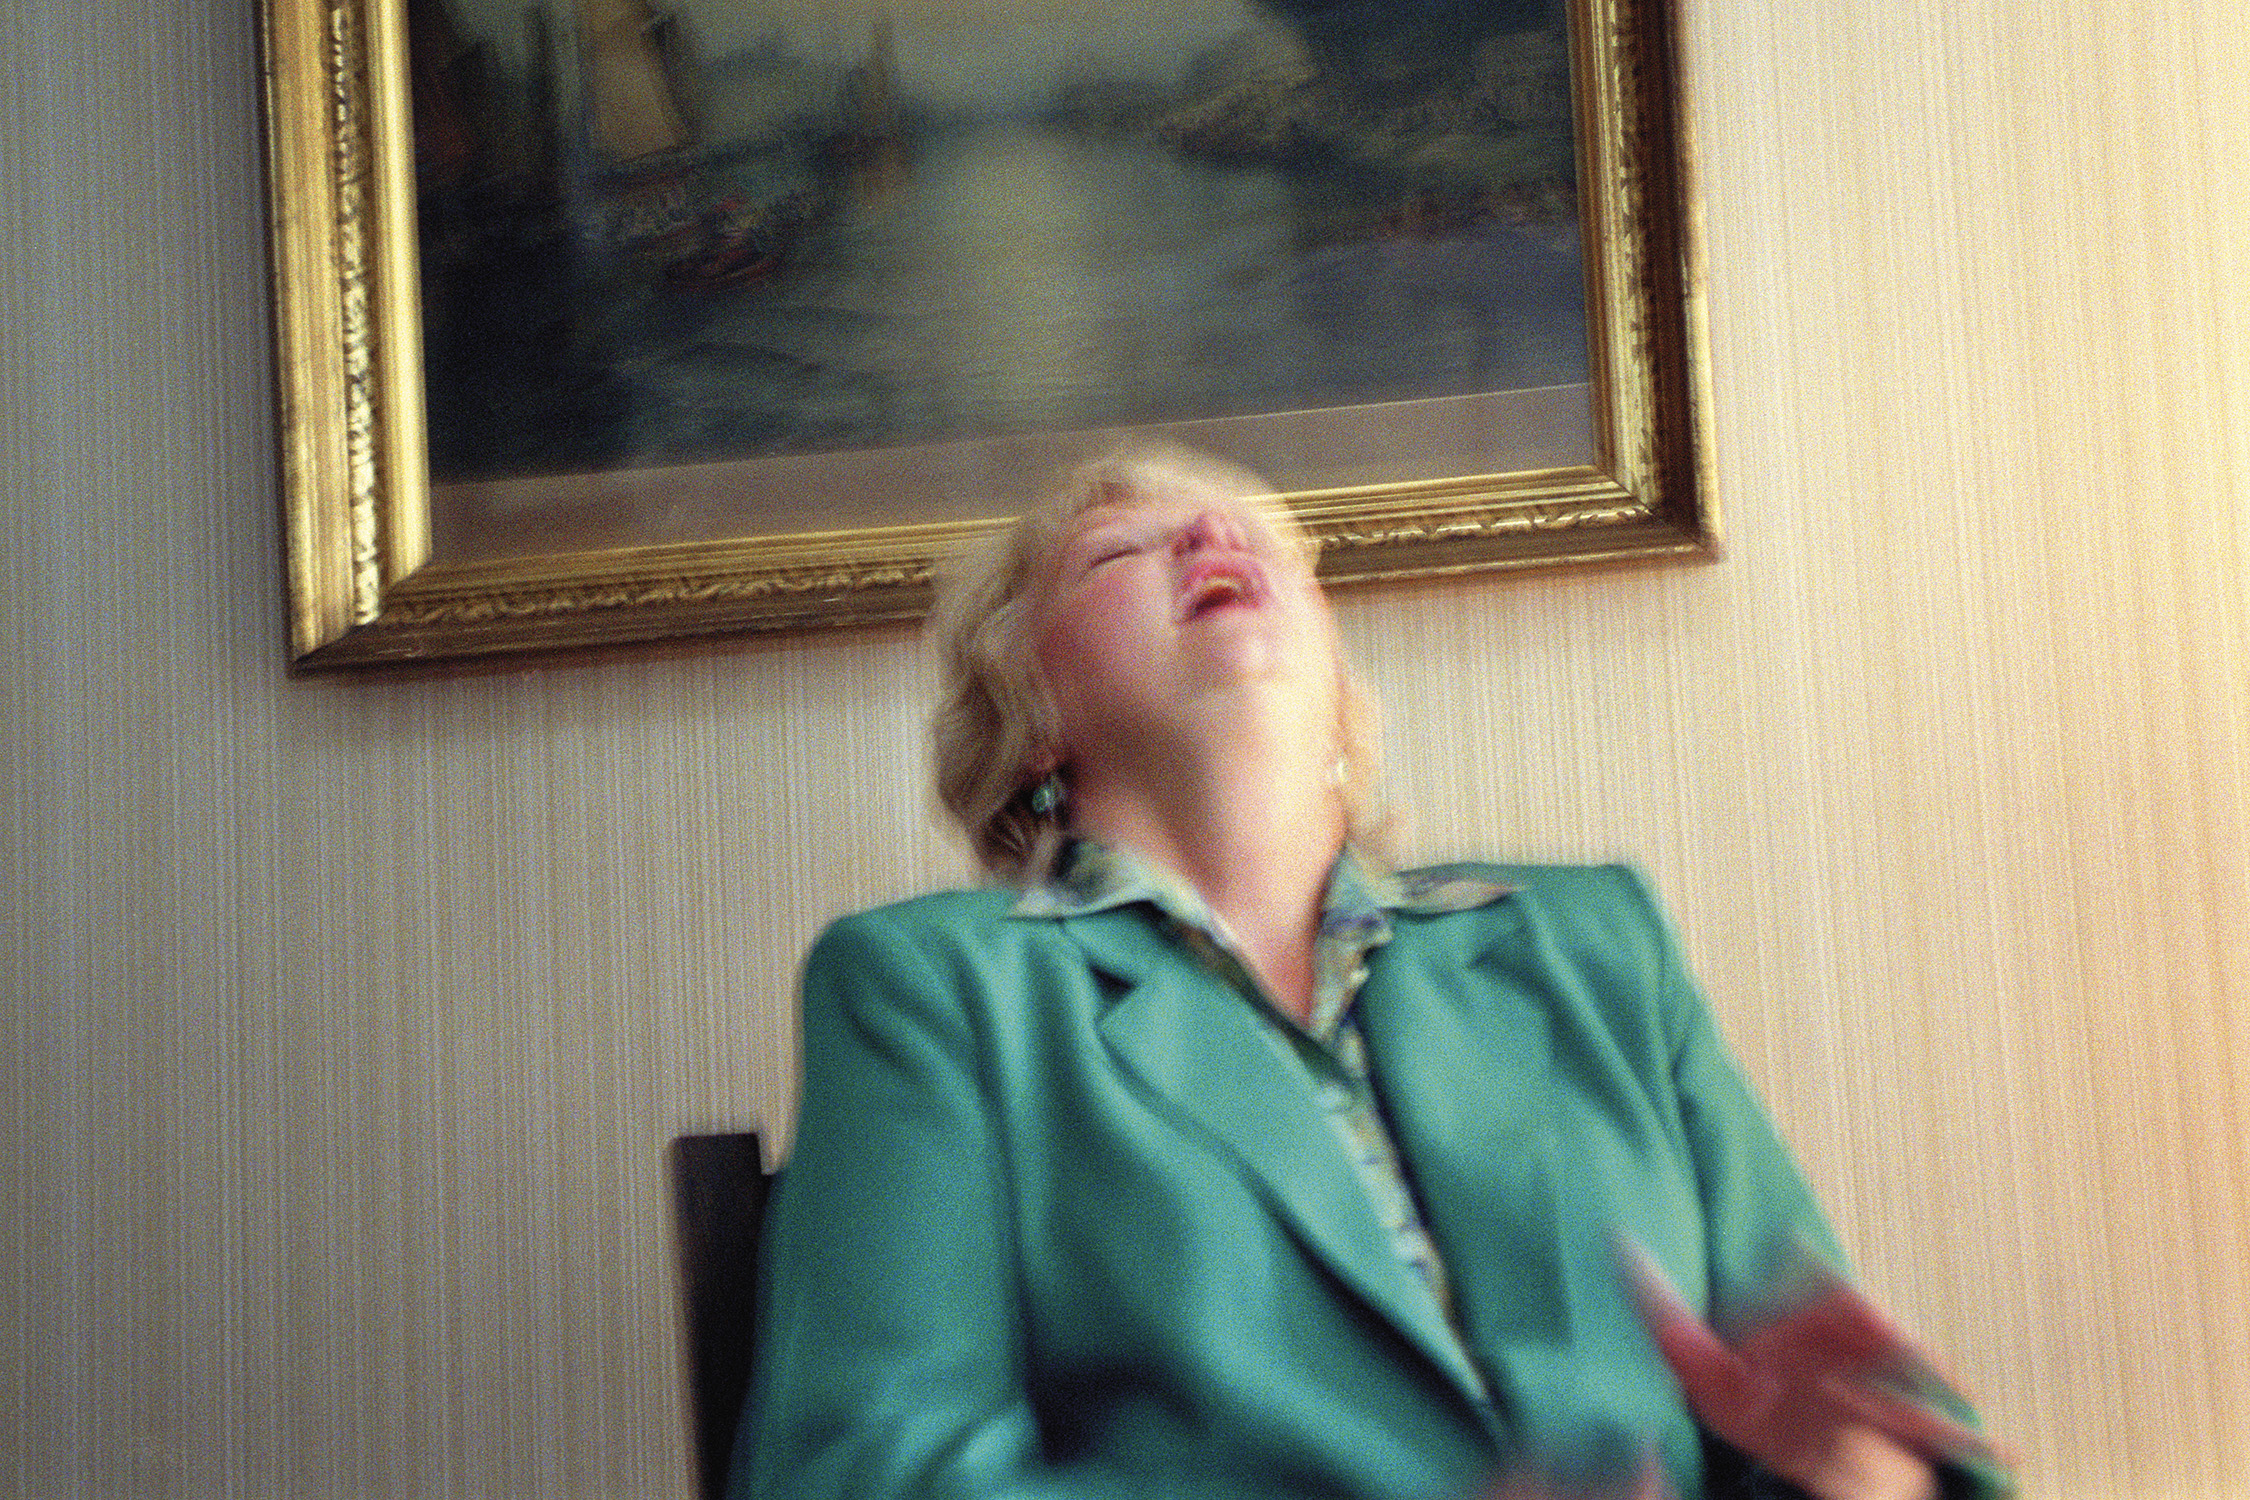 Gretchen Clark laughs as her deceased brother Chapman interrupts a reading to tell her a joke, Lily Dale, New York, 2001. From SÃ©ance by Shannon Taggart